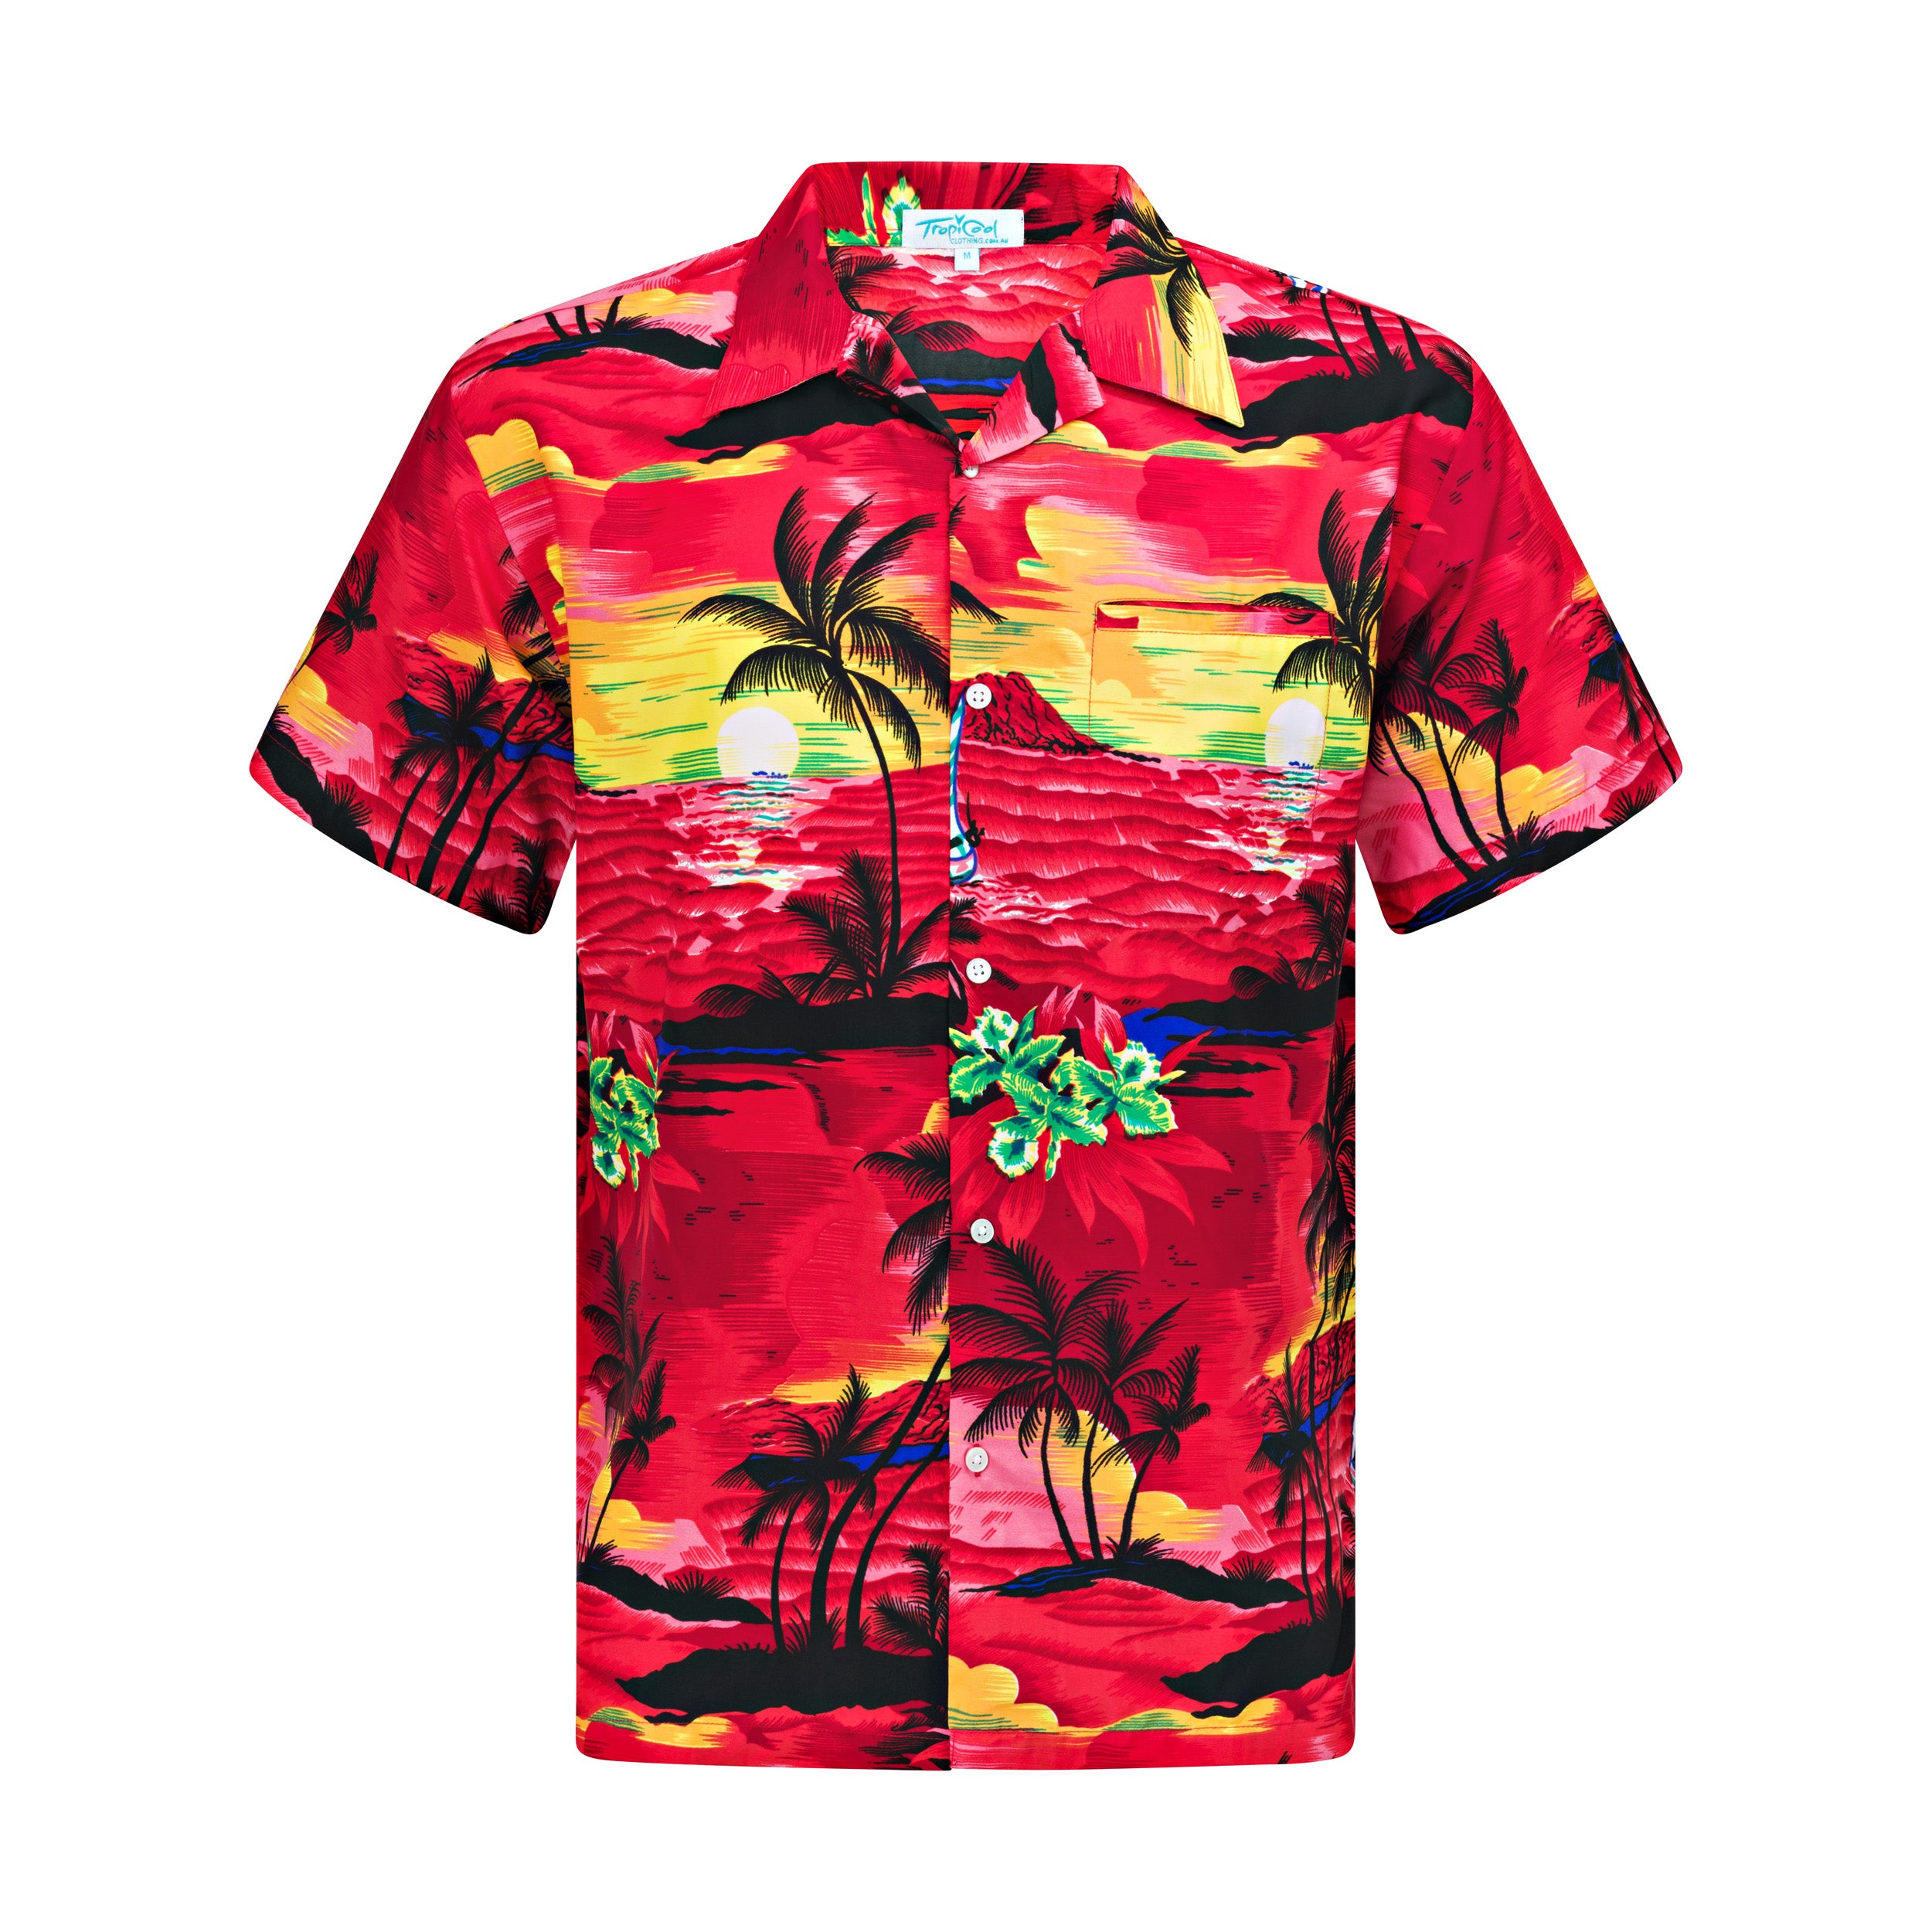 Sunset Red Adult Shirt